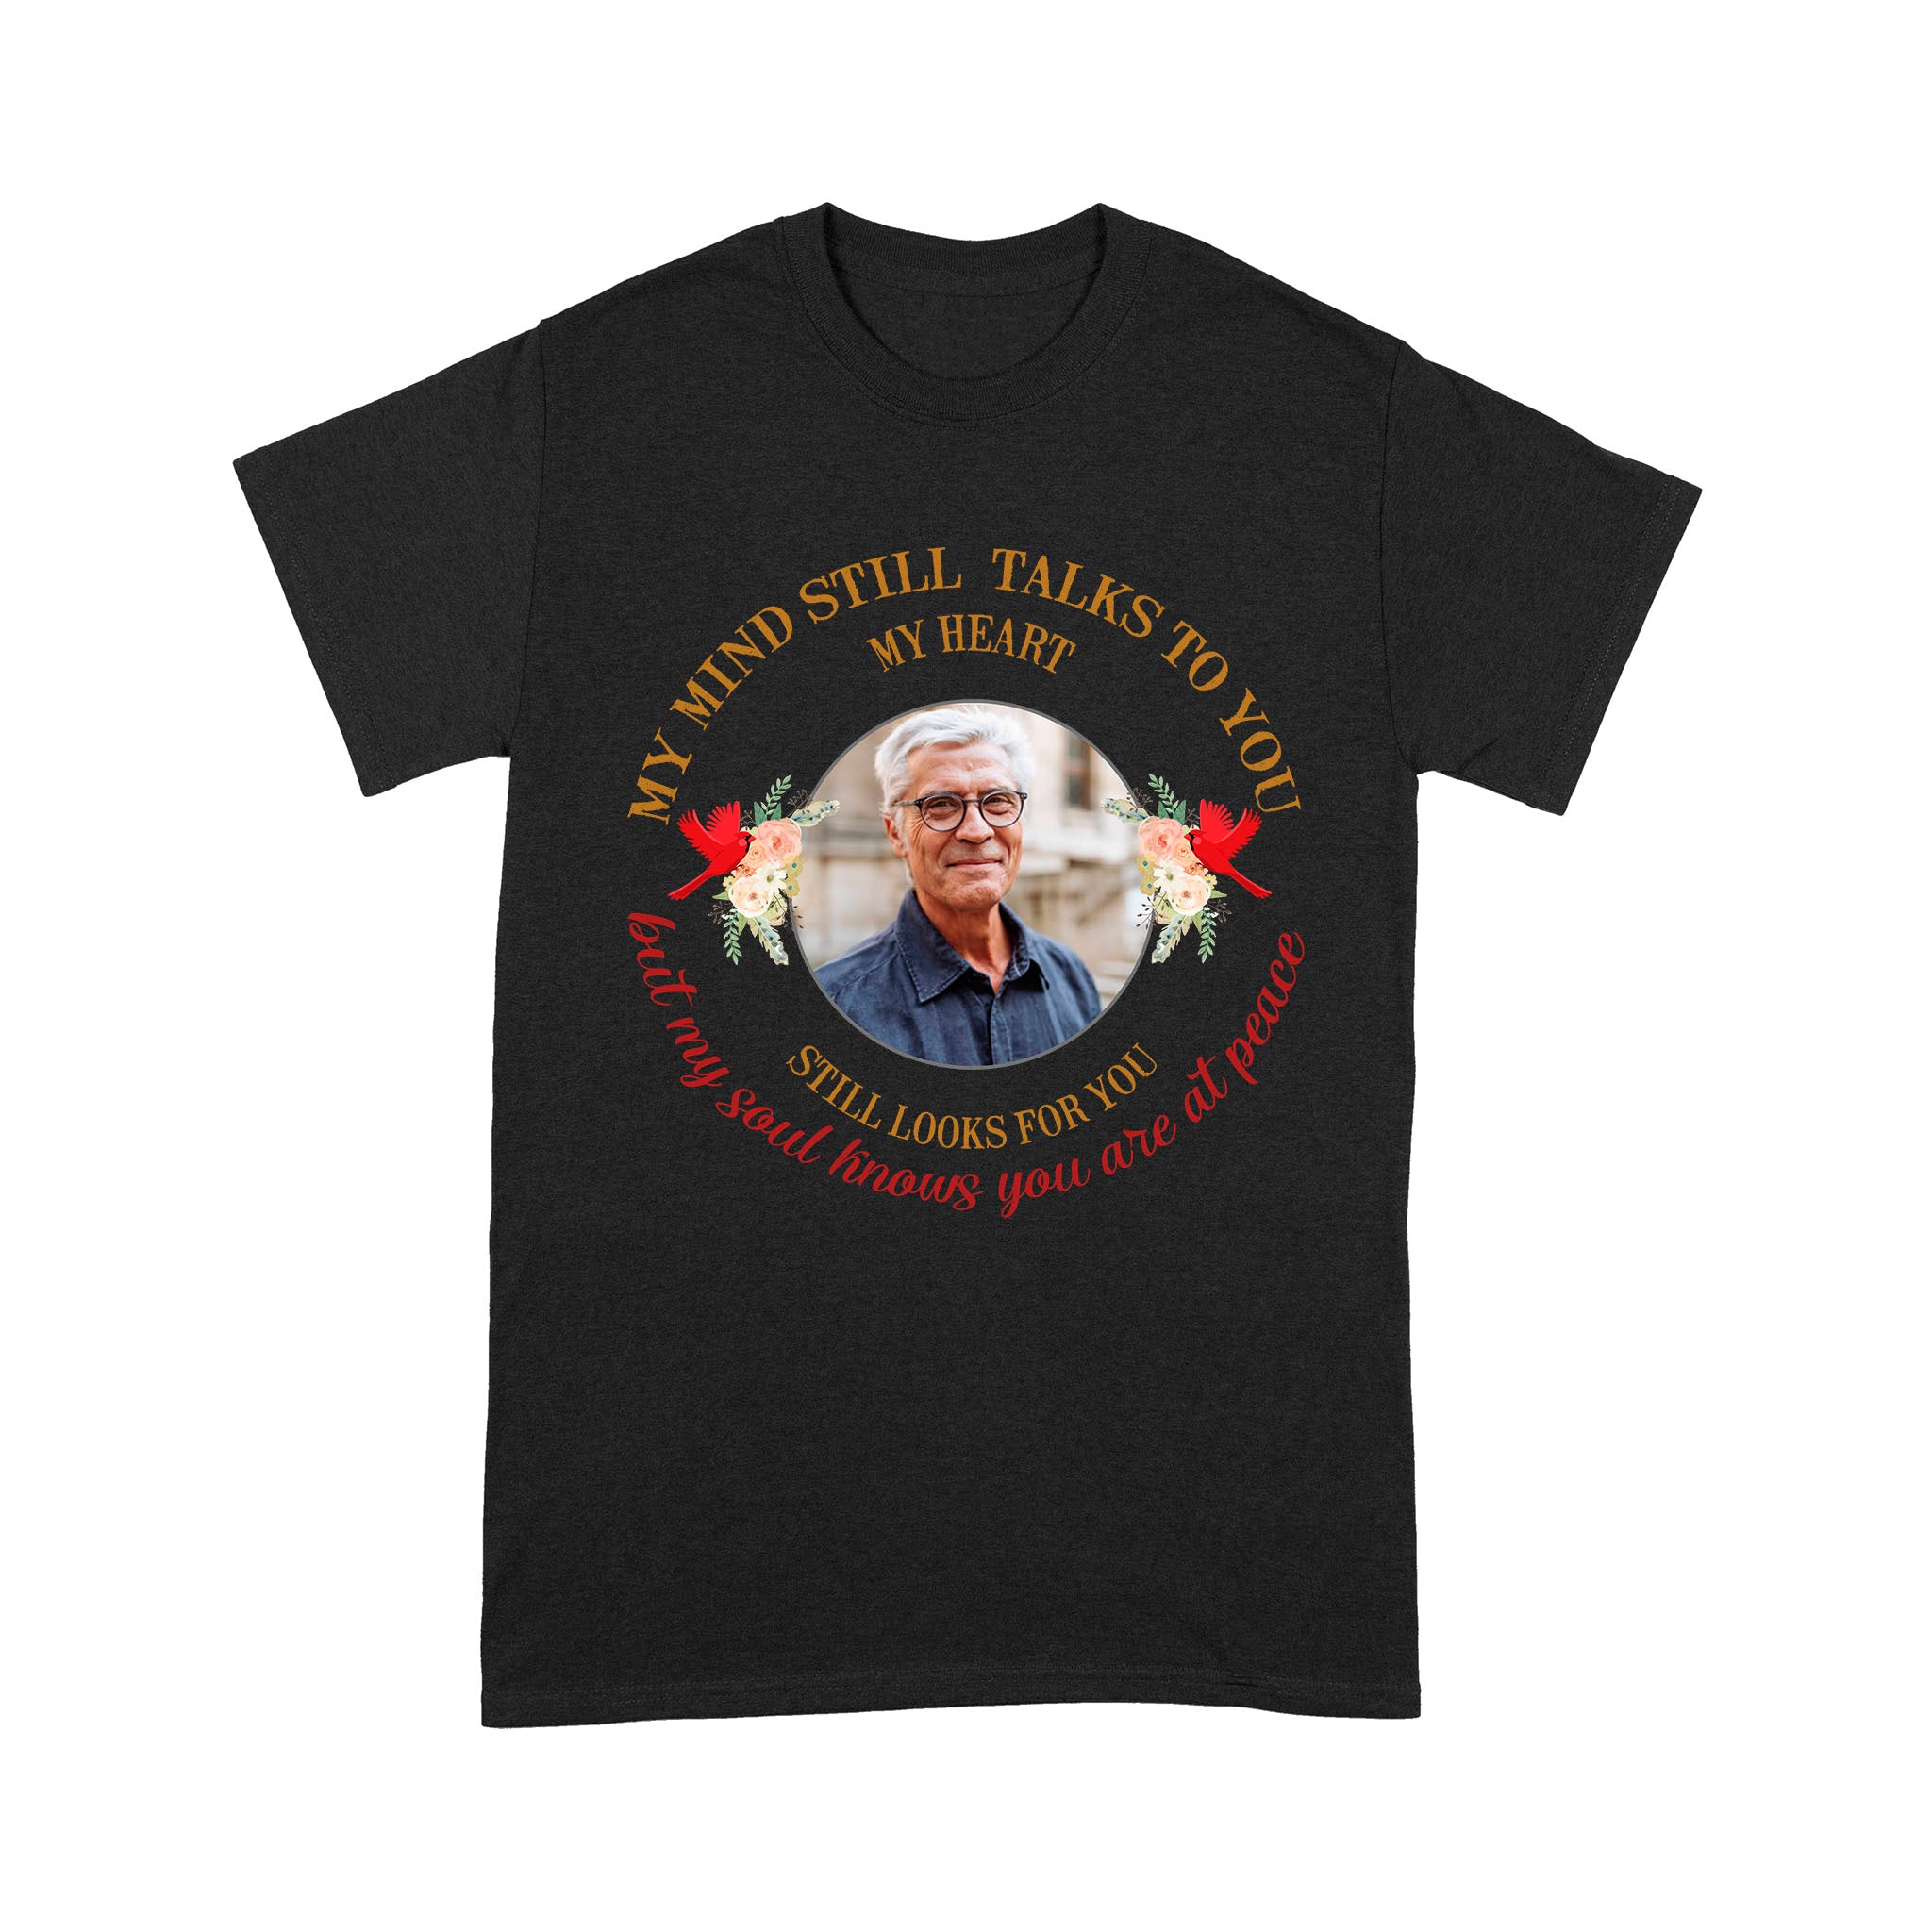 Memorial Remembrance T-Shirt| in Loving Memory| Shirt Memorial Gifts for  Loss of Father Mother Brother Daughter in Heaven| ML59 Black